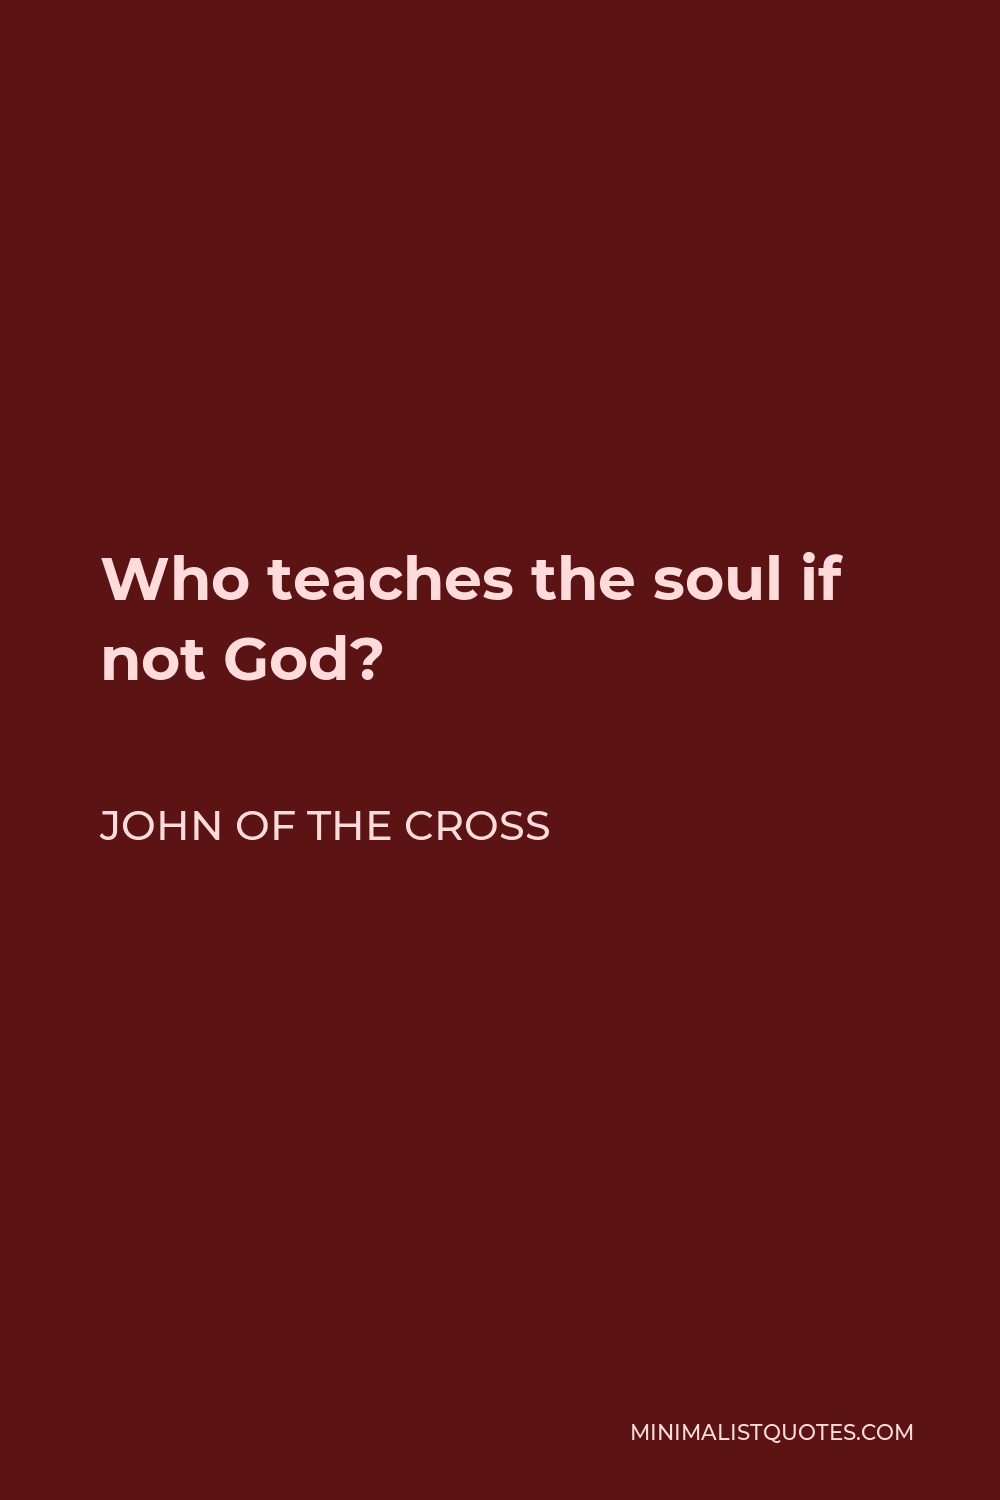 John of the Cross Quote - Who teaches the soul if not God?